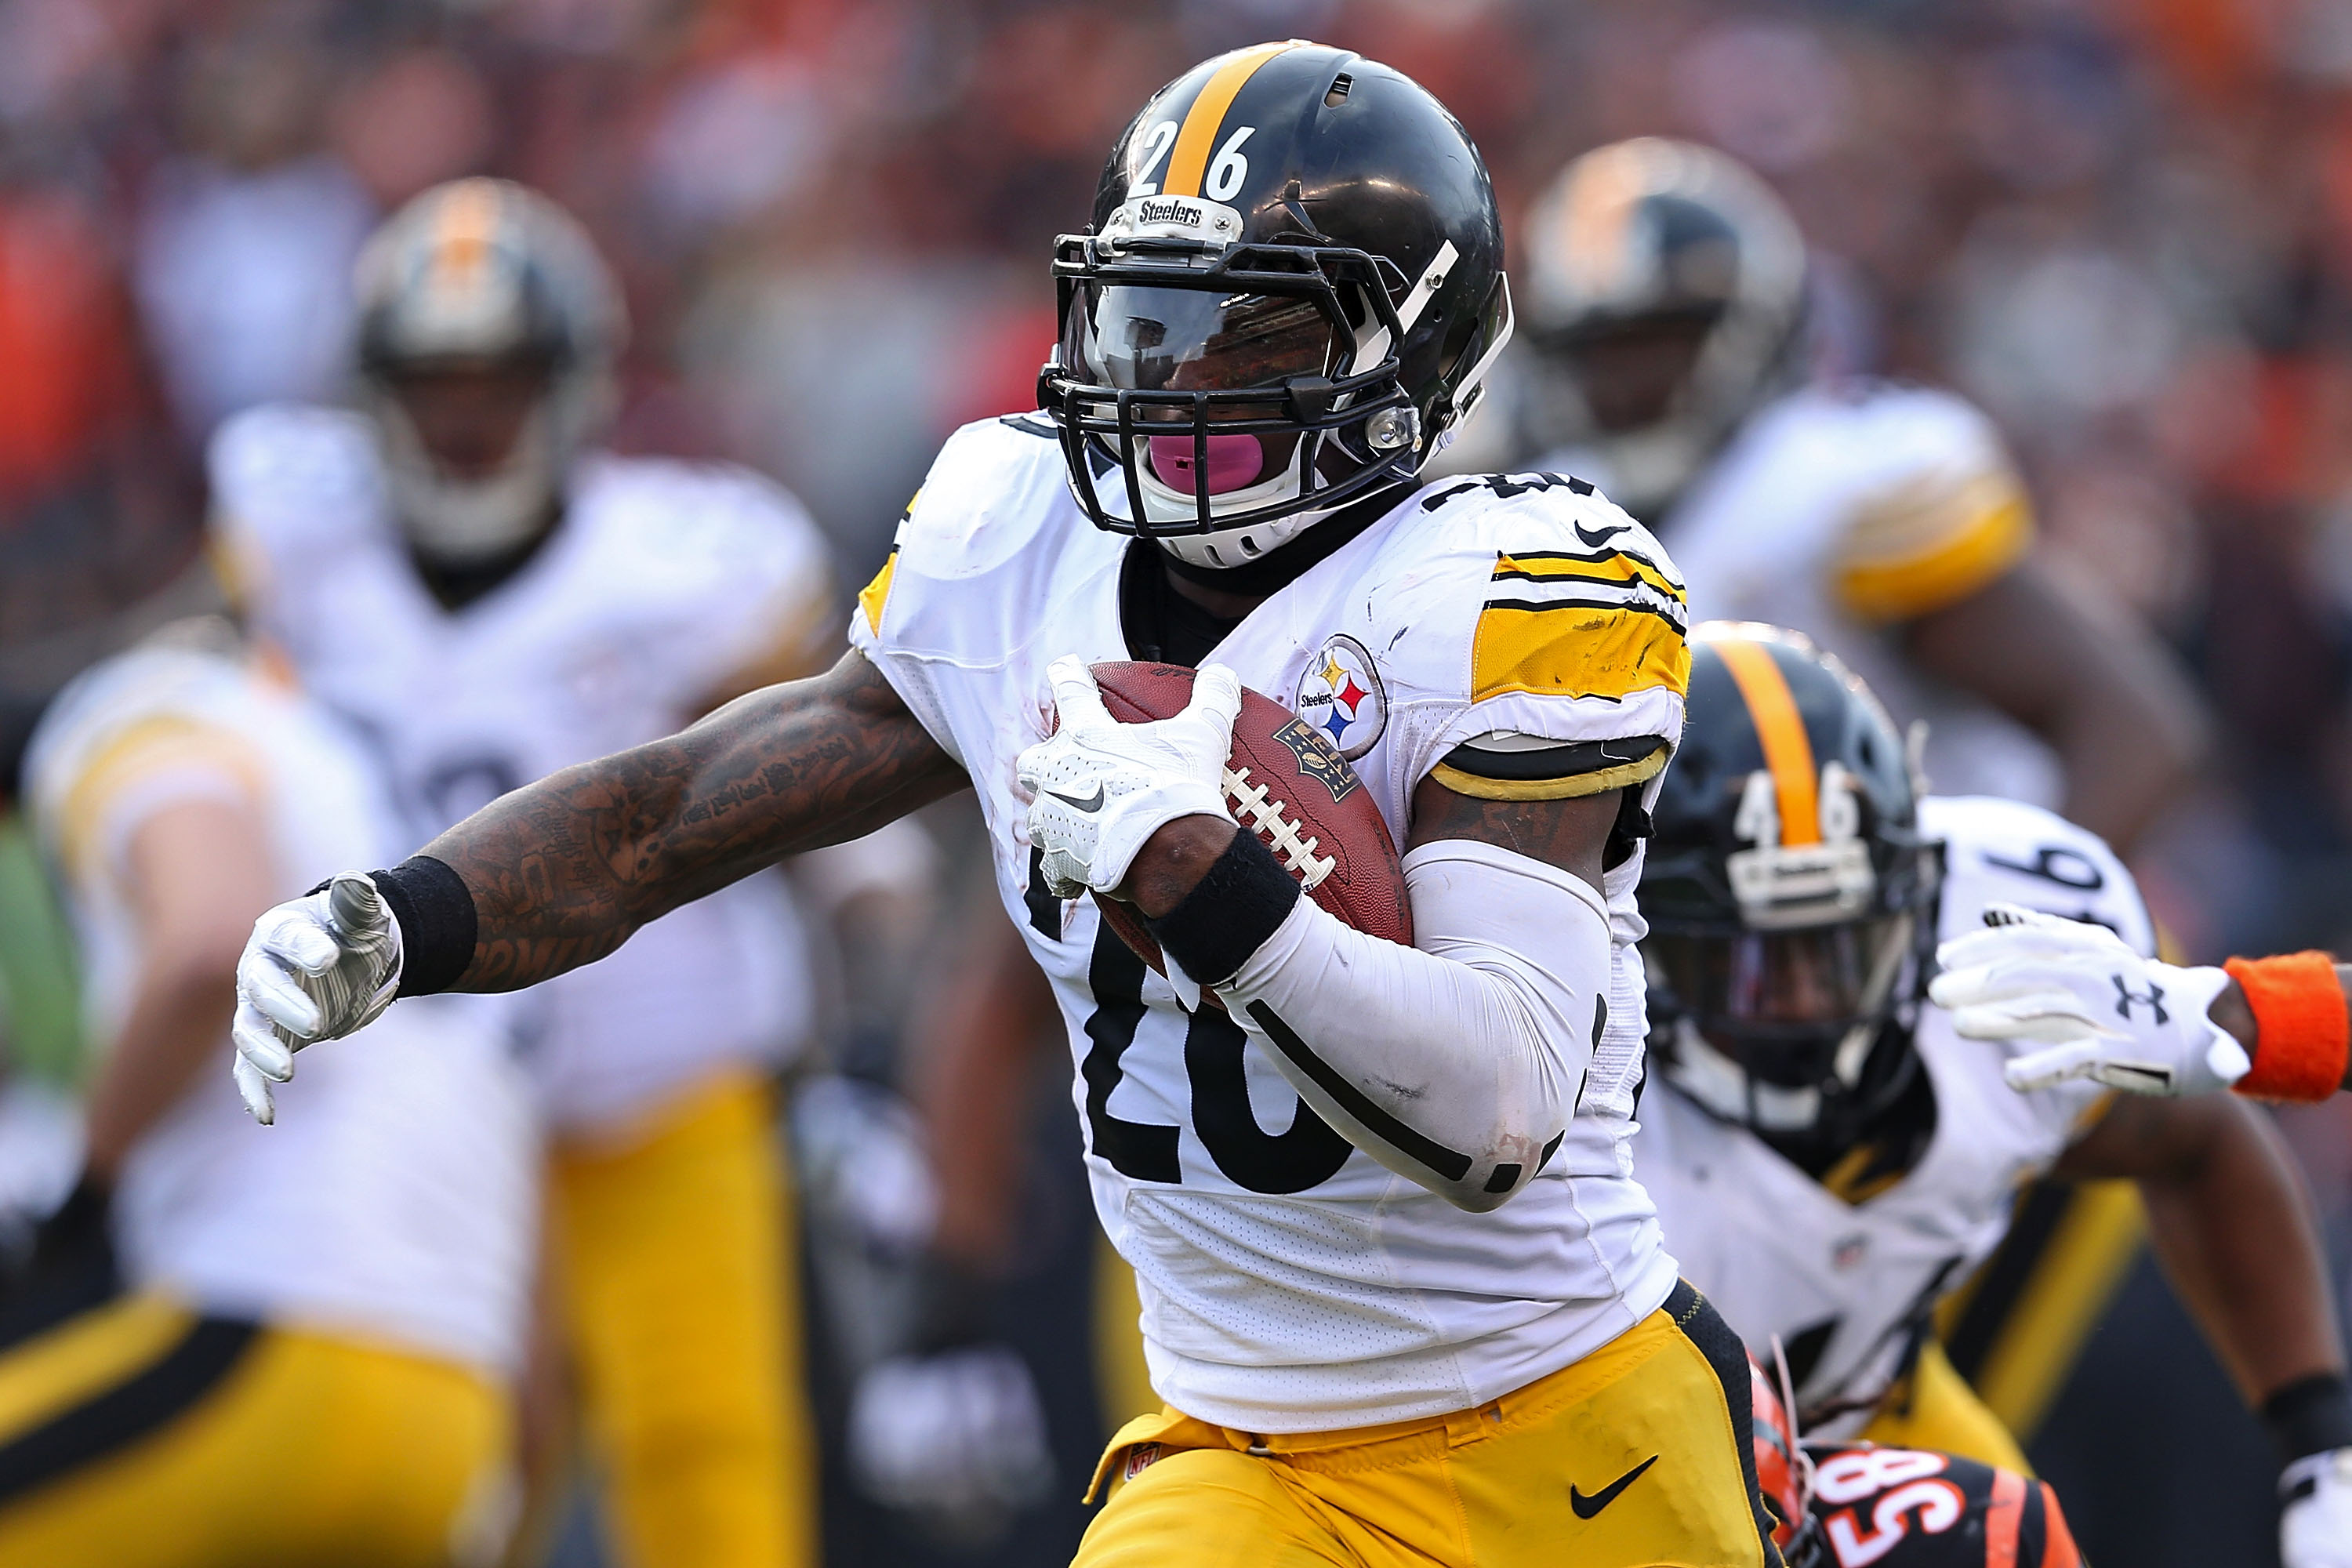 Le'Veon Bell wlll play a huge role in the Steelers offense without Roethilsberger (Getty).